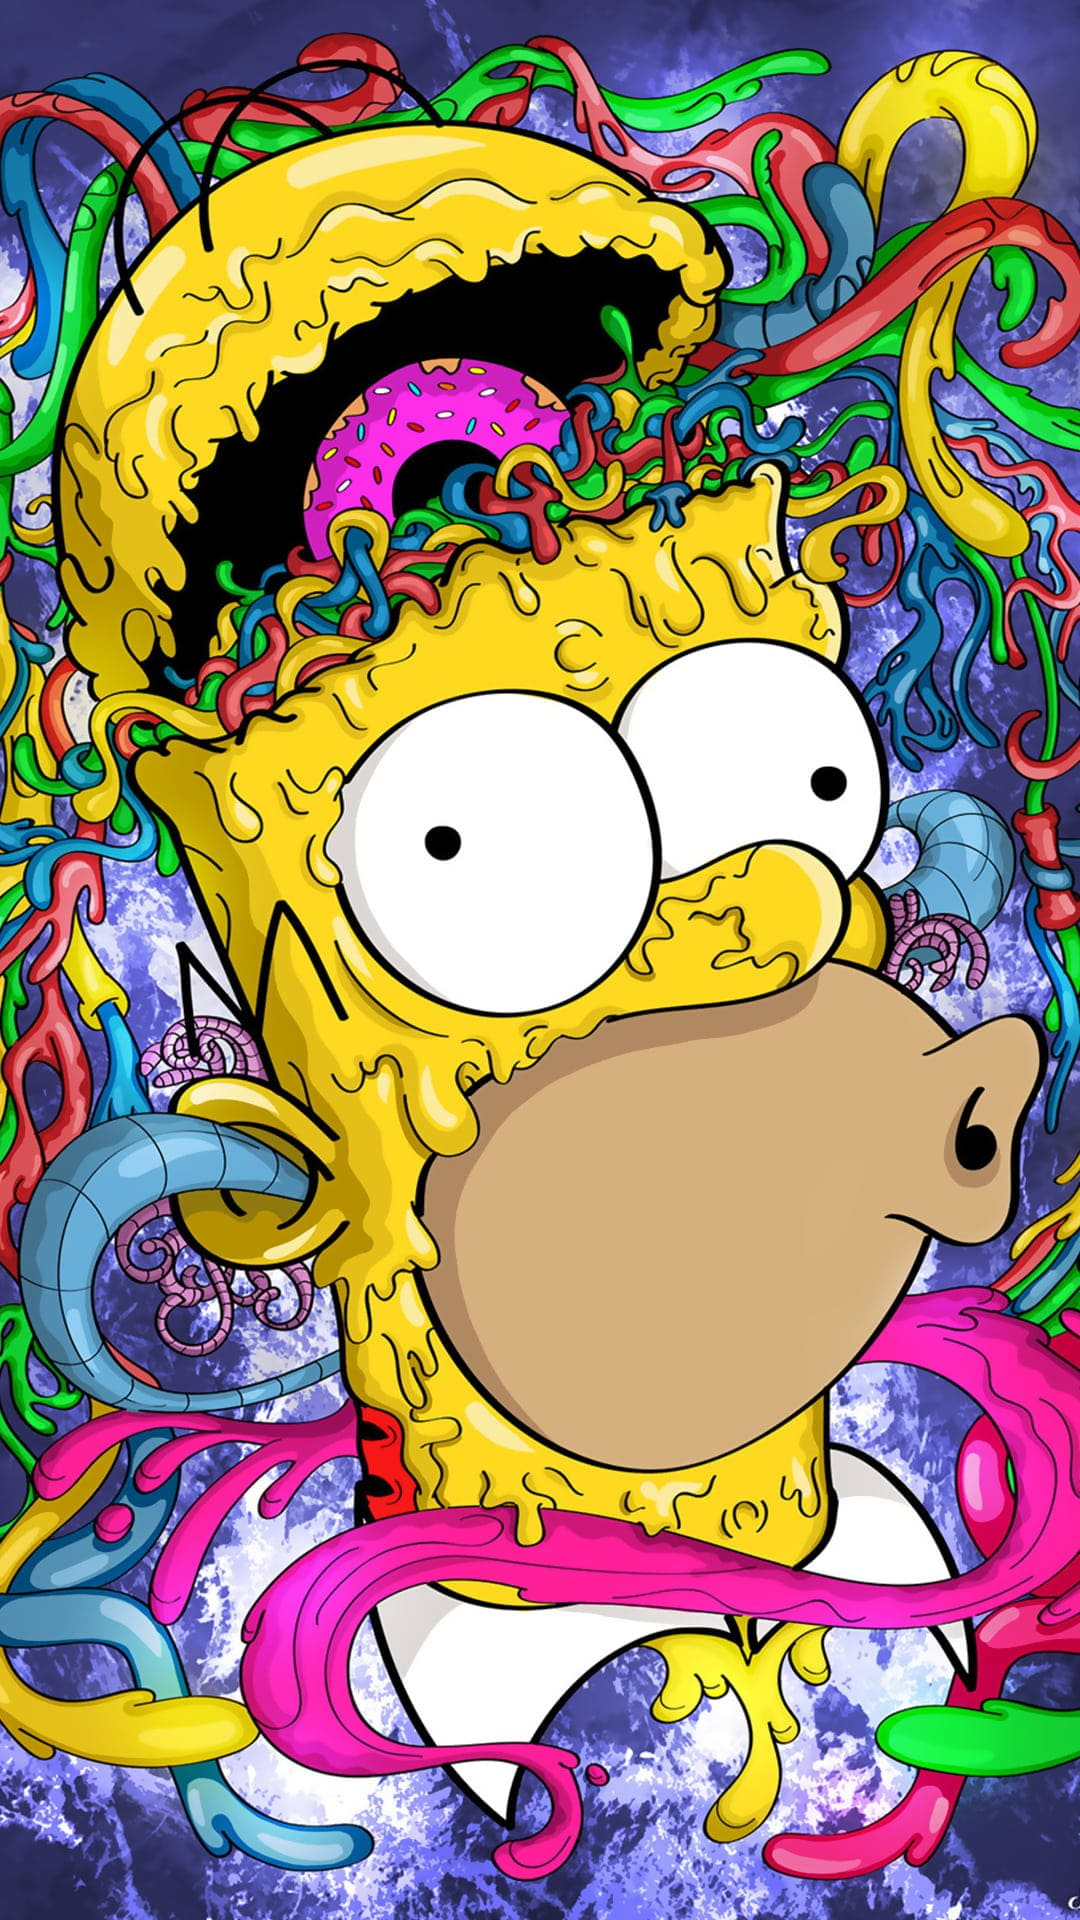 1080x1920 The Simpsons Wallpapers Top Best Quality The Simpsons Backgrounds (HD,4k